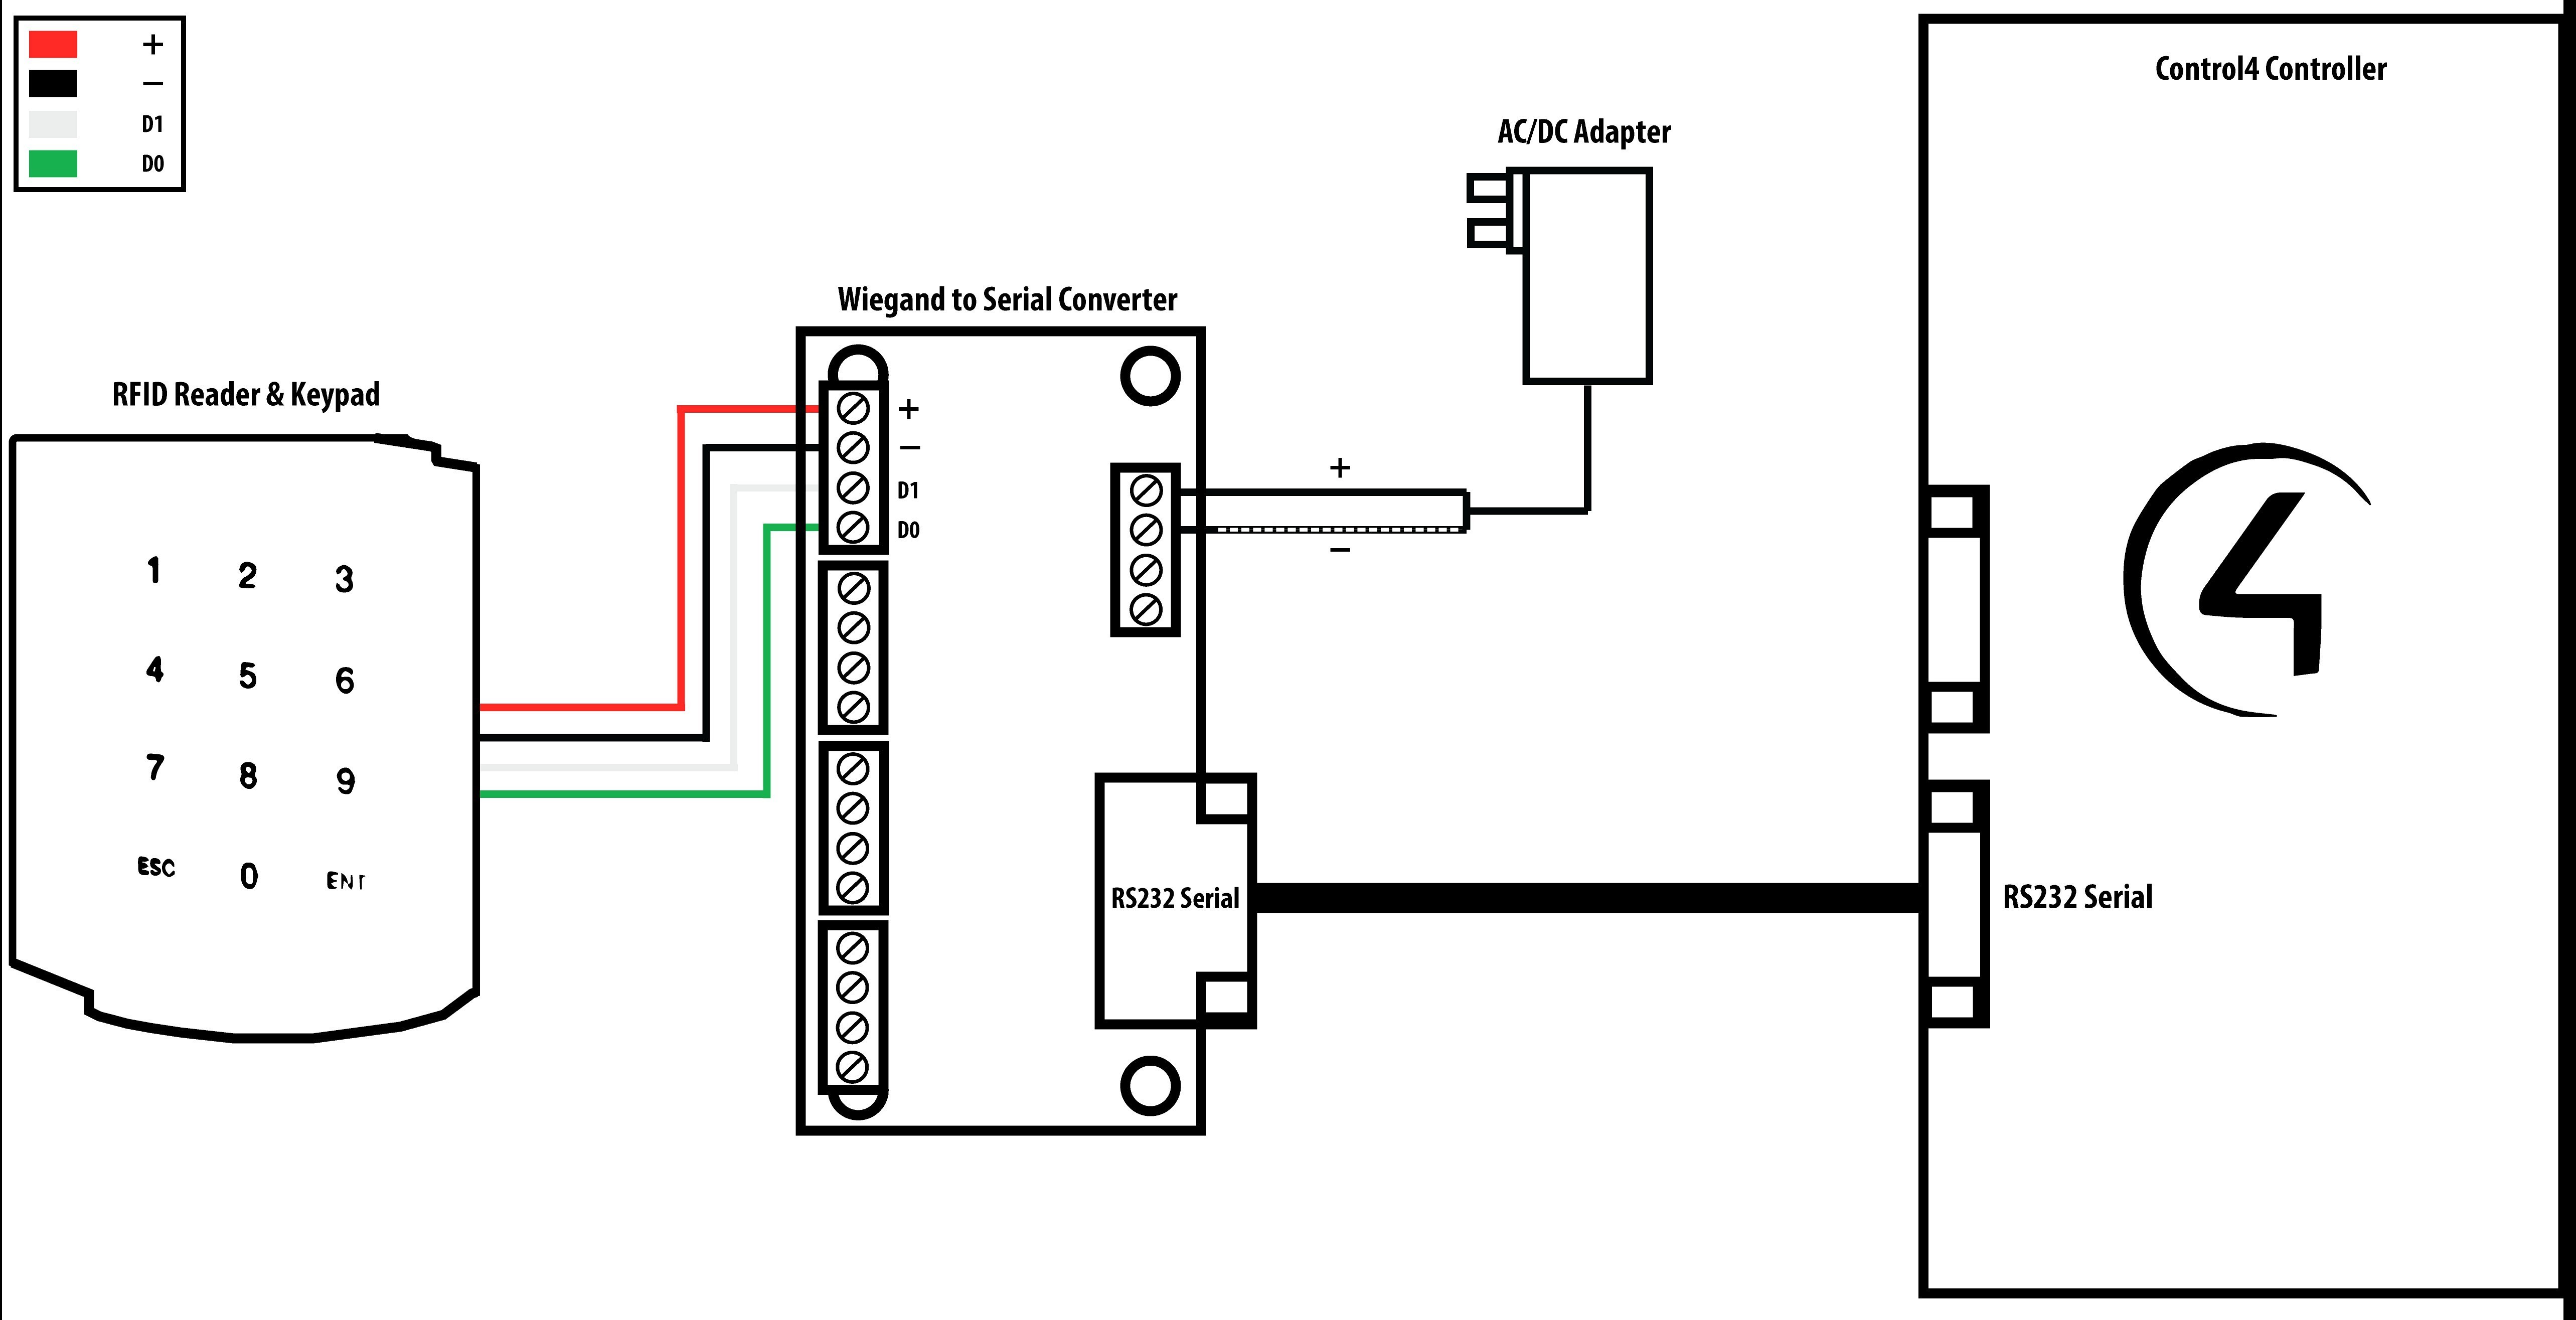 hid wiring diagram with relay Download Hid Wiring Diagram Without Relay Save Key Card Wiring DOWNLOAD Wiring Diagram